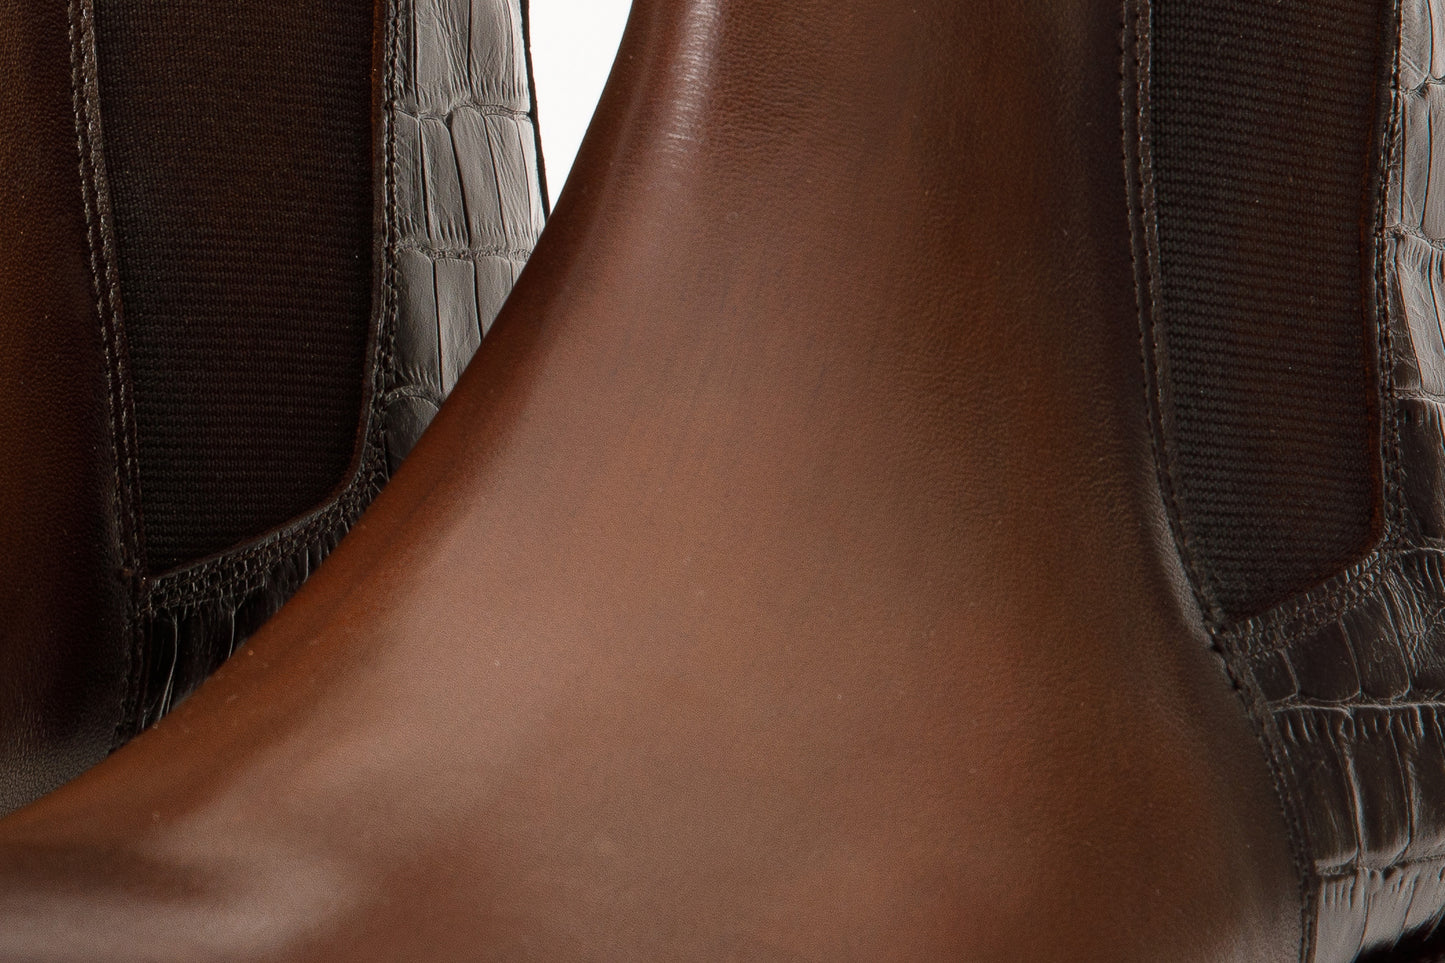 The Manby Brown Leather Chelsea Men Boot